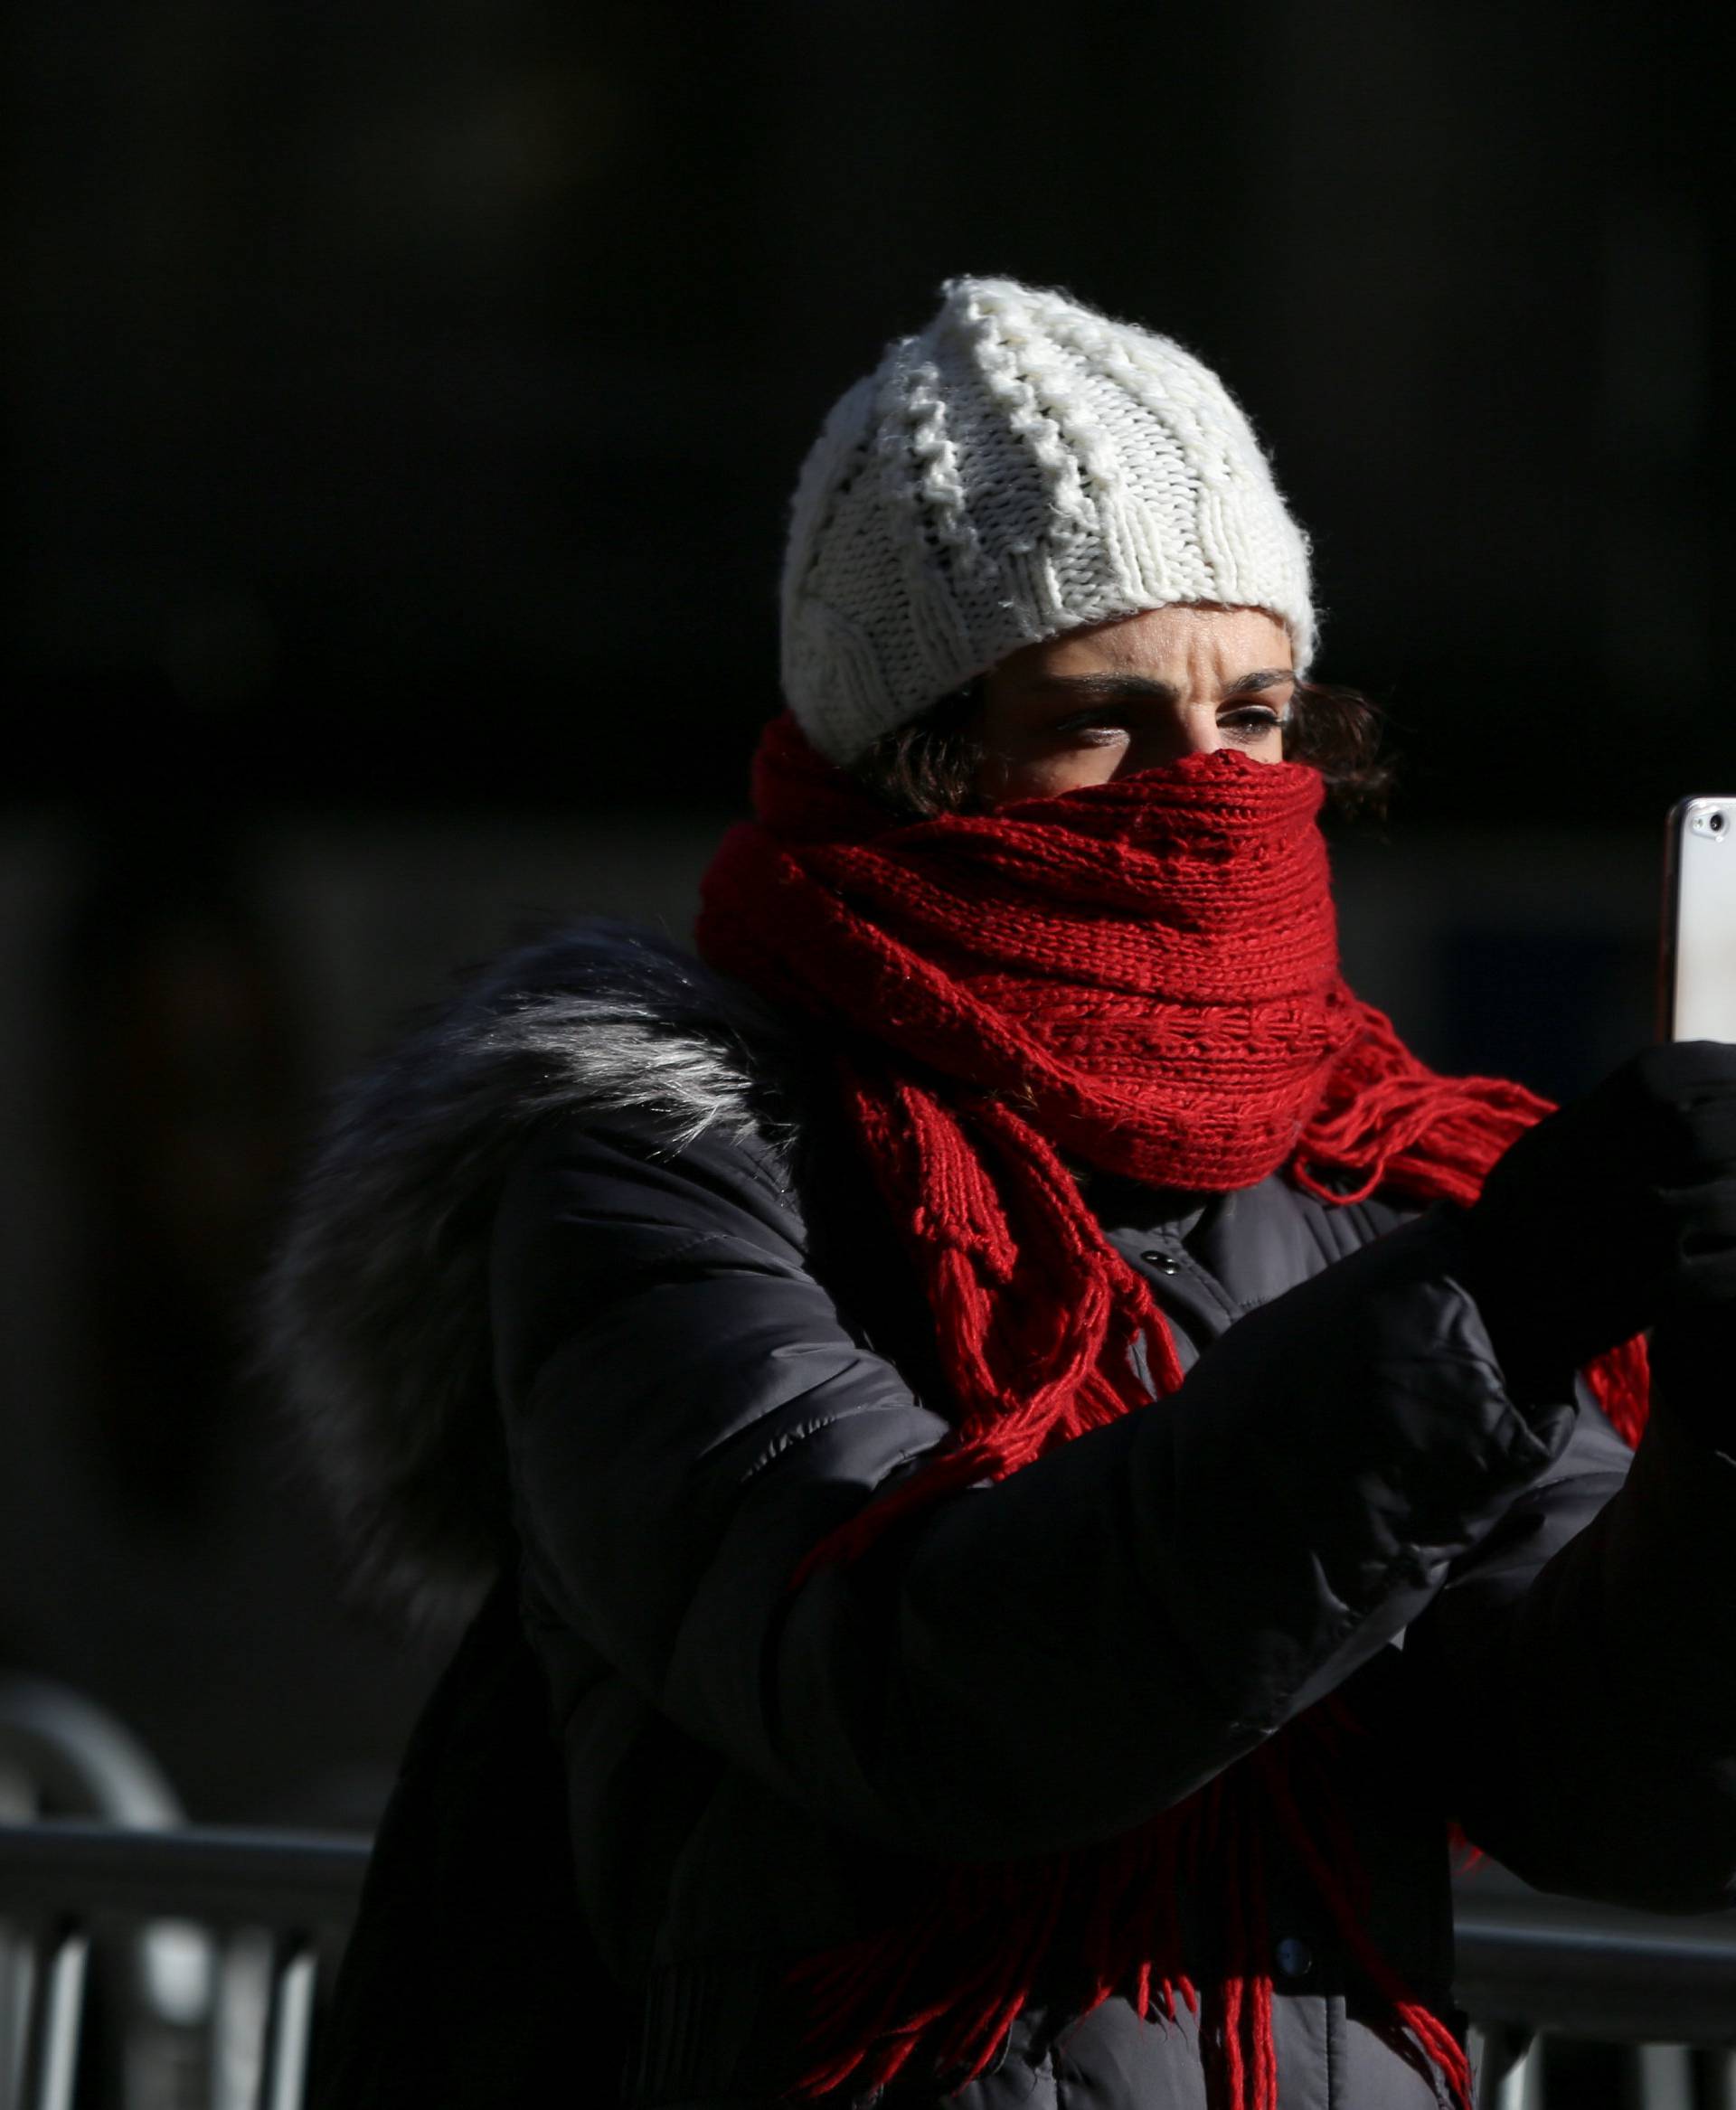 A woman takes a picture as she bundles up against the cold temperature in Times Square in New York